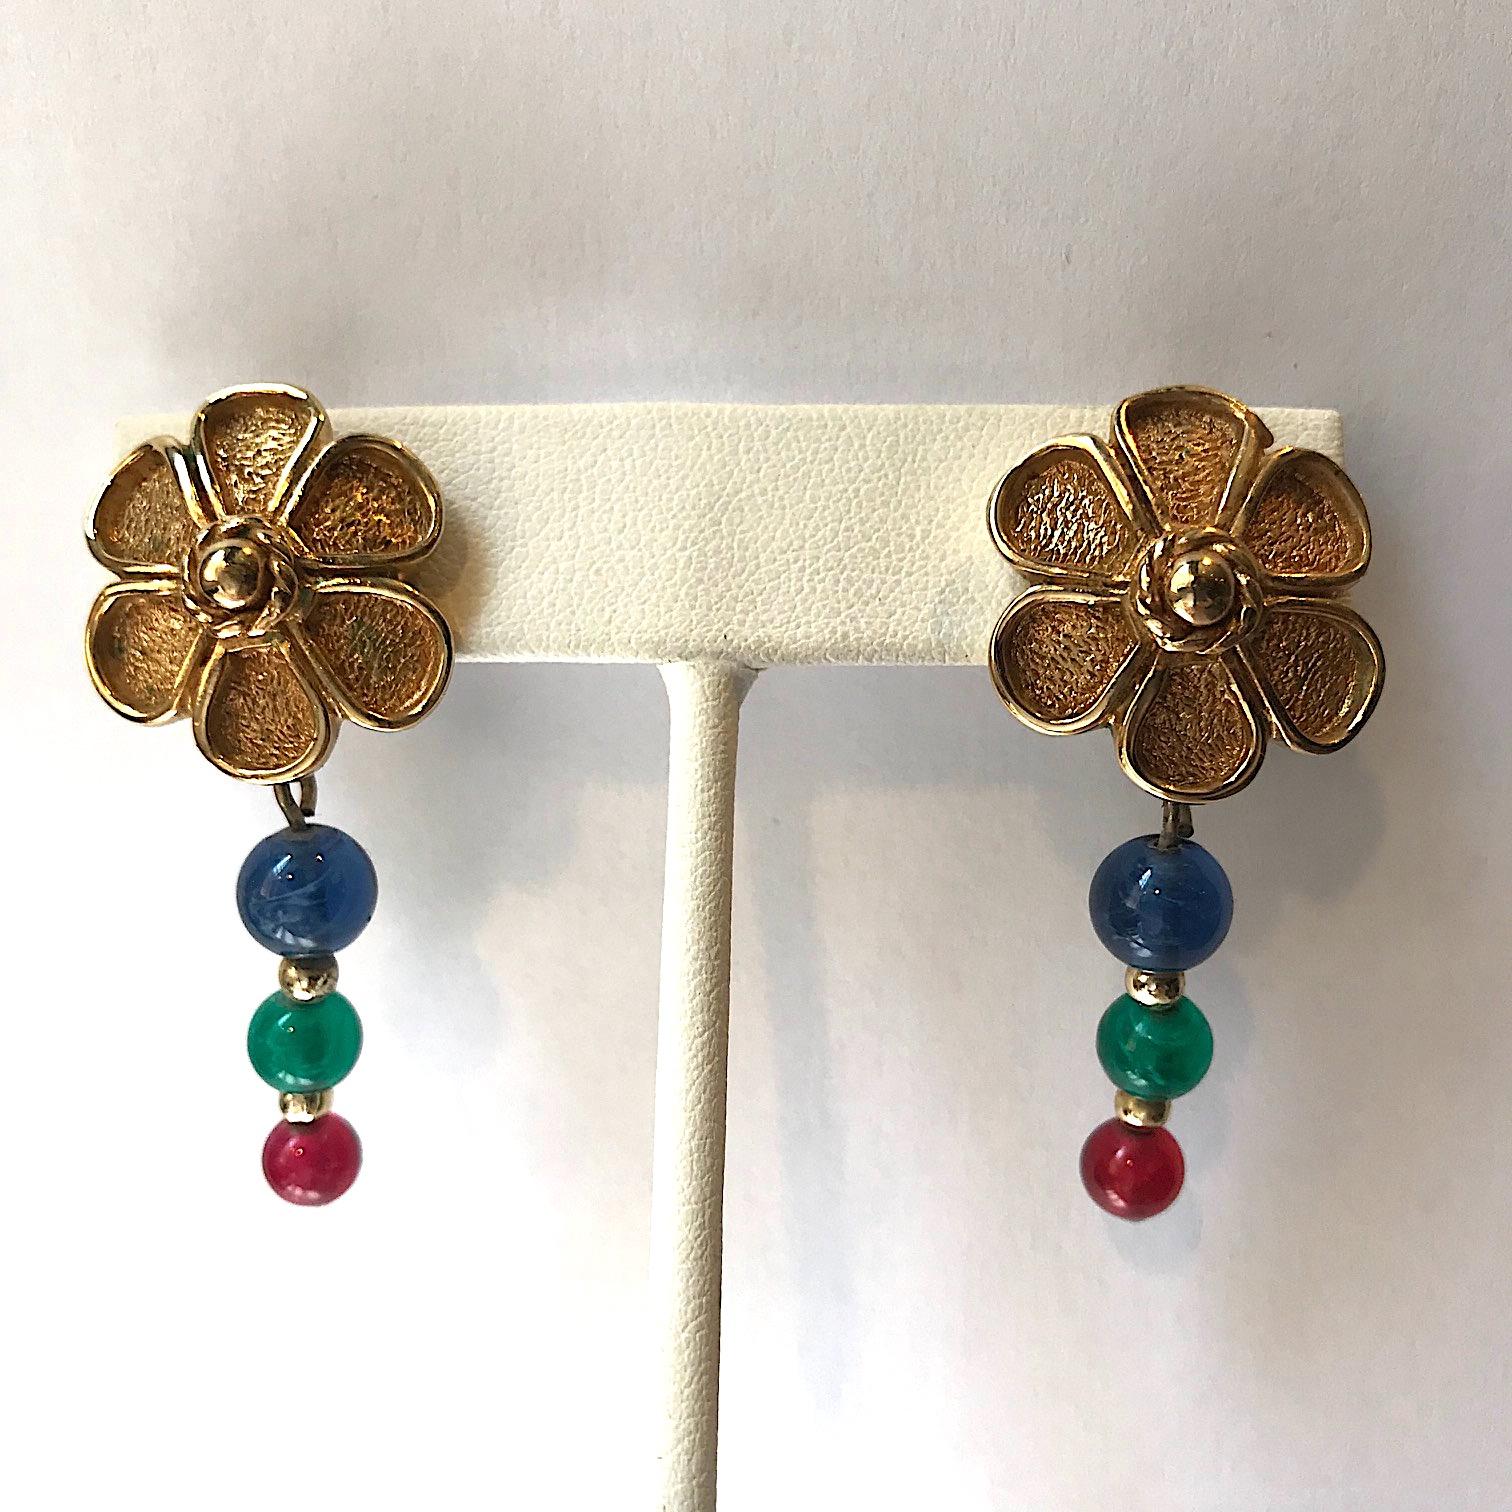 Grosse Germany 1980s Flower Earrings with Red, Blue & Green Beads 3